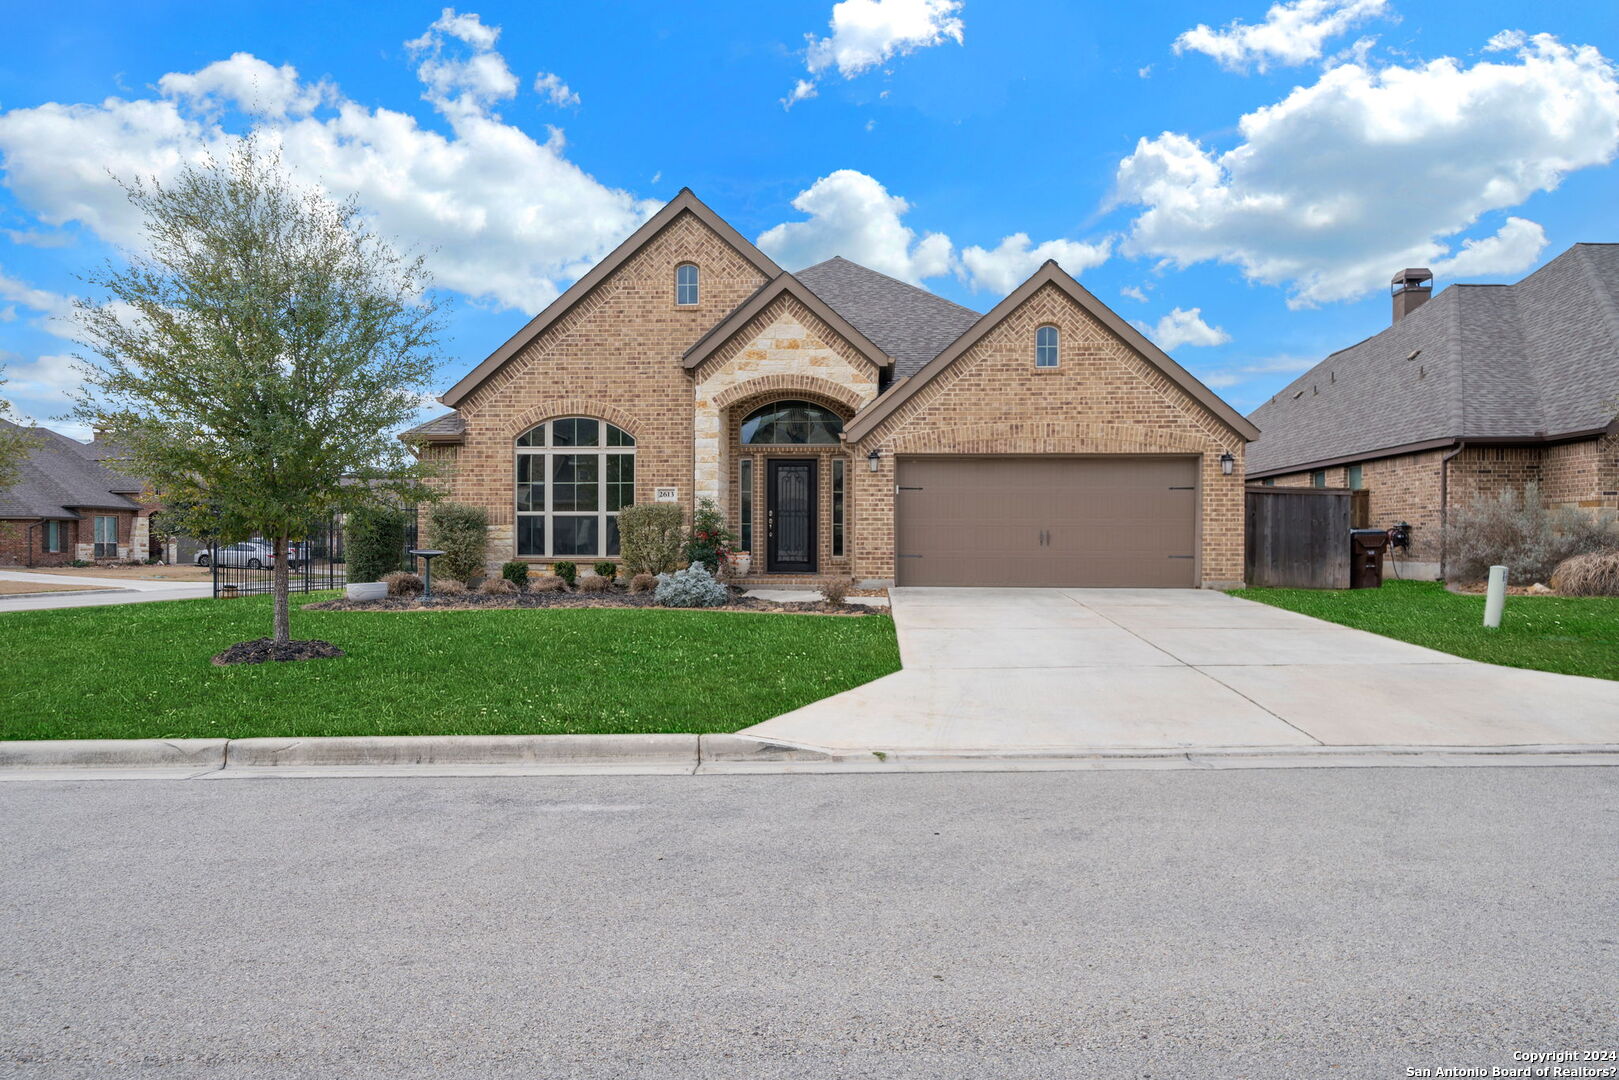 Photo of 2613 Malboona Mews Dr in New Braunfels, TX